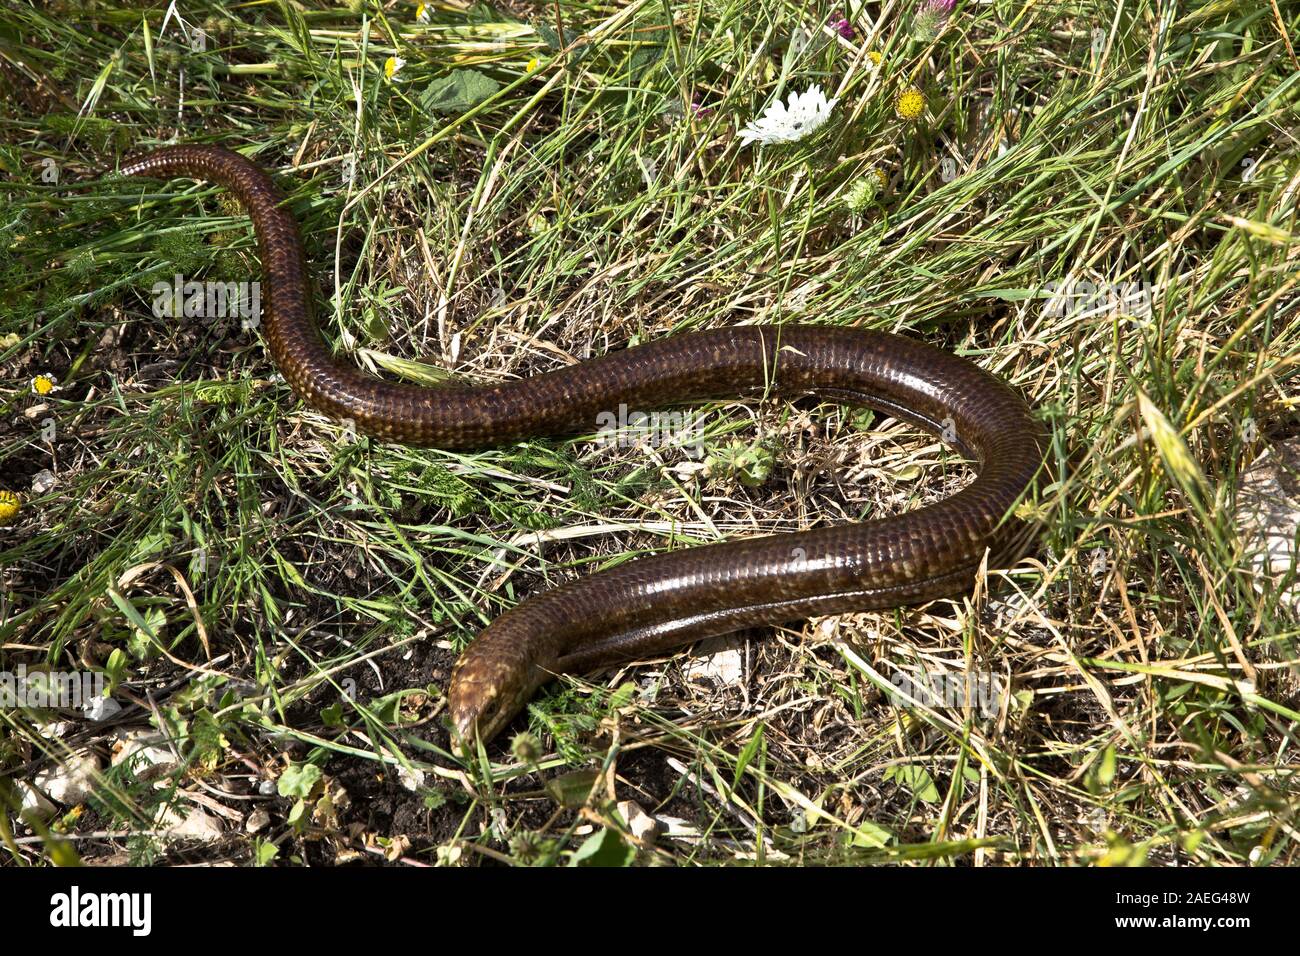 The sheltopusik (Pseudopus apodus), also commonly called Pallas's glass lizard or the European legless lizard, is a species of large glass lizard foun Stock Photo